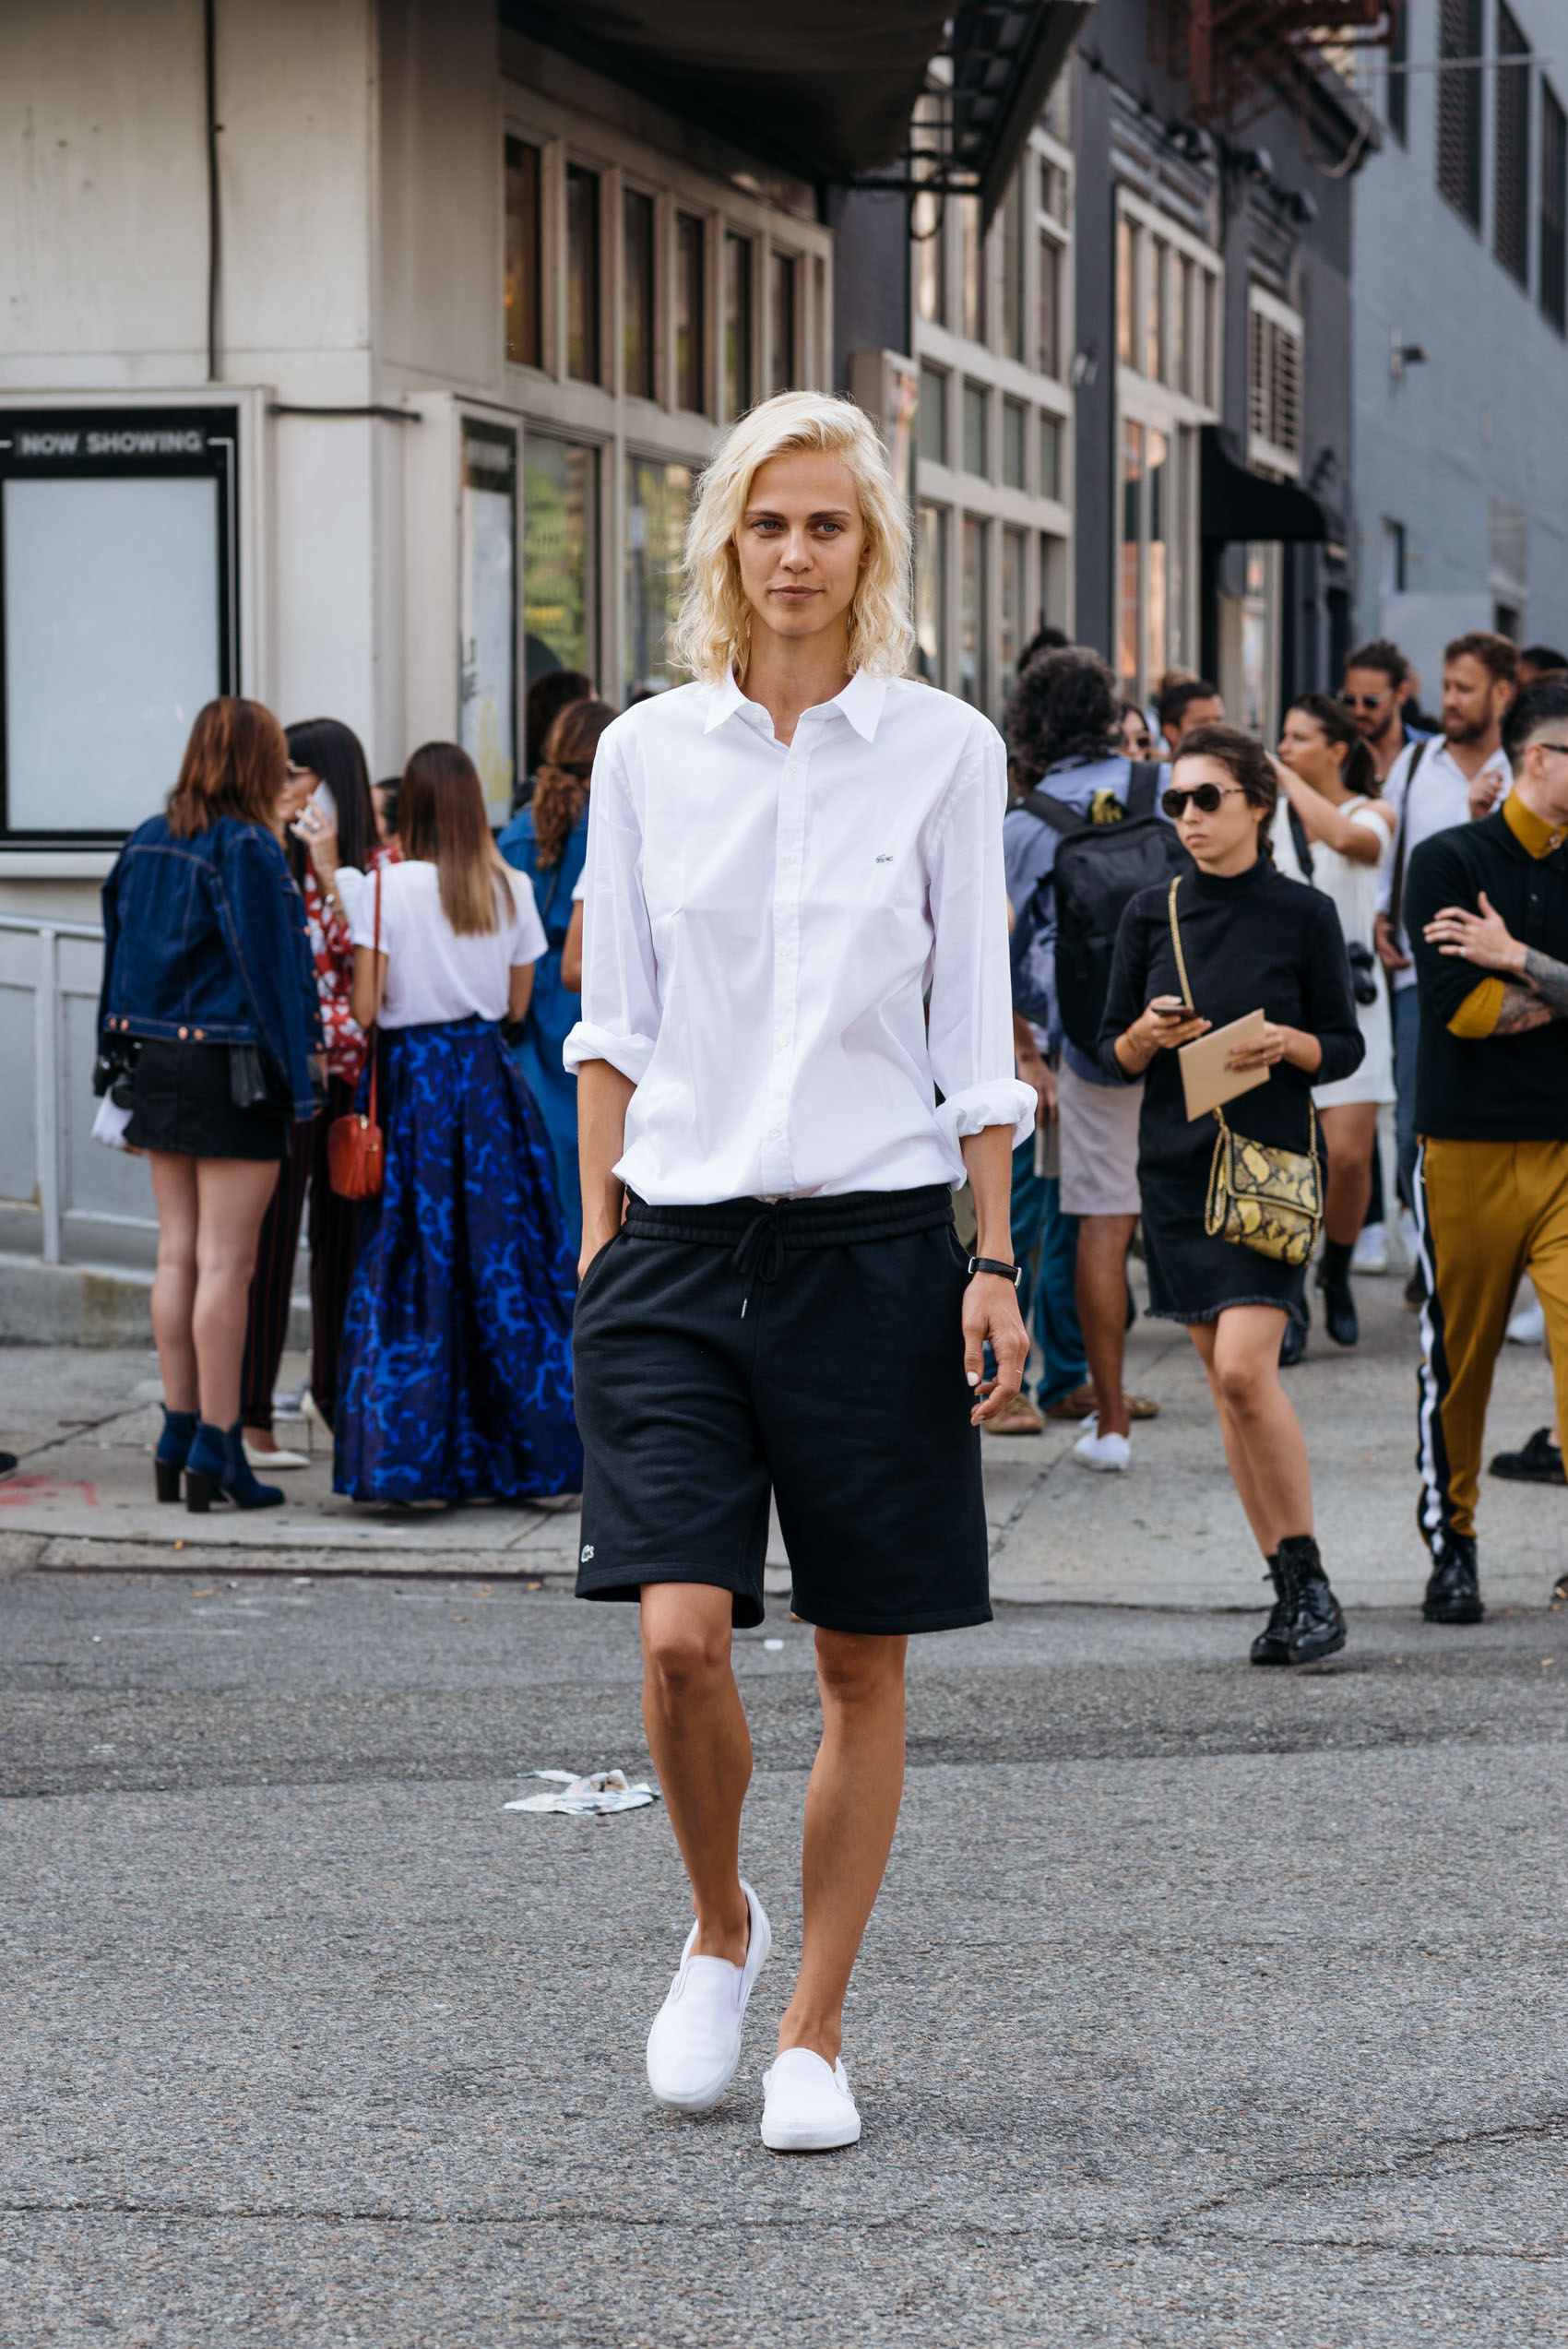 Model off duty street style after Lacoste SS17 at NYFW